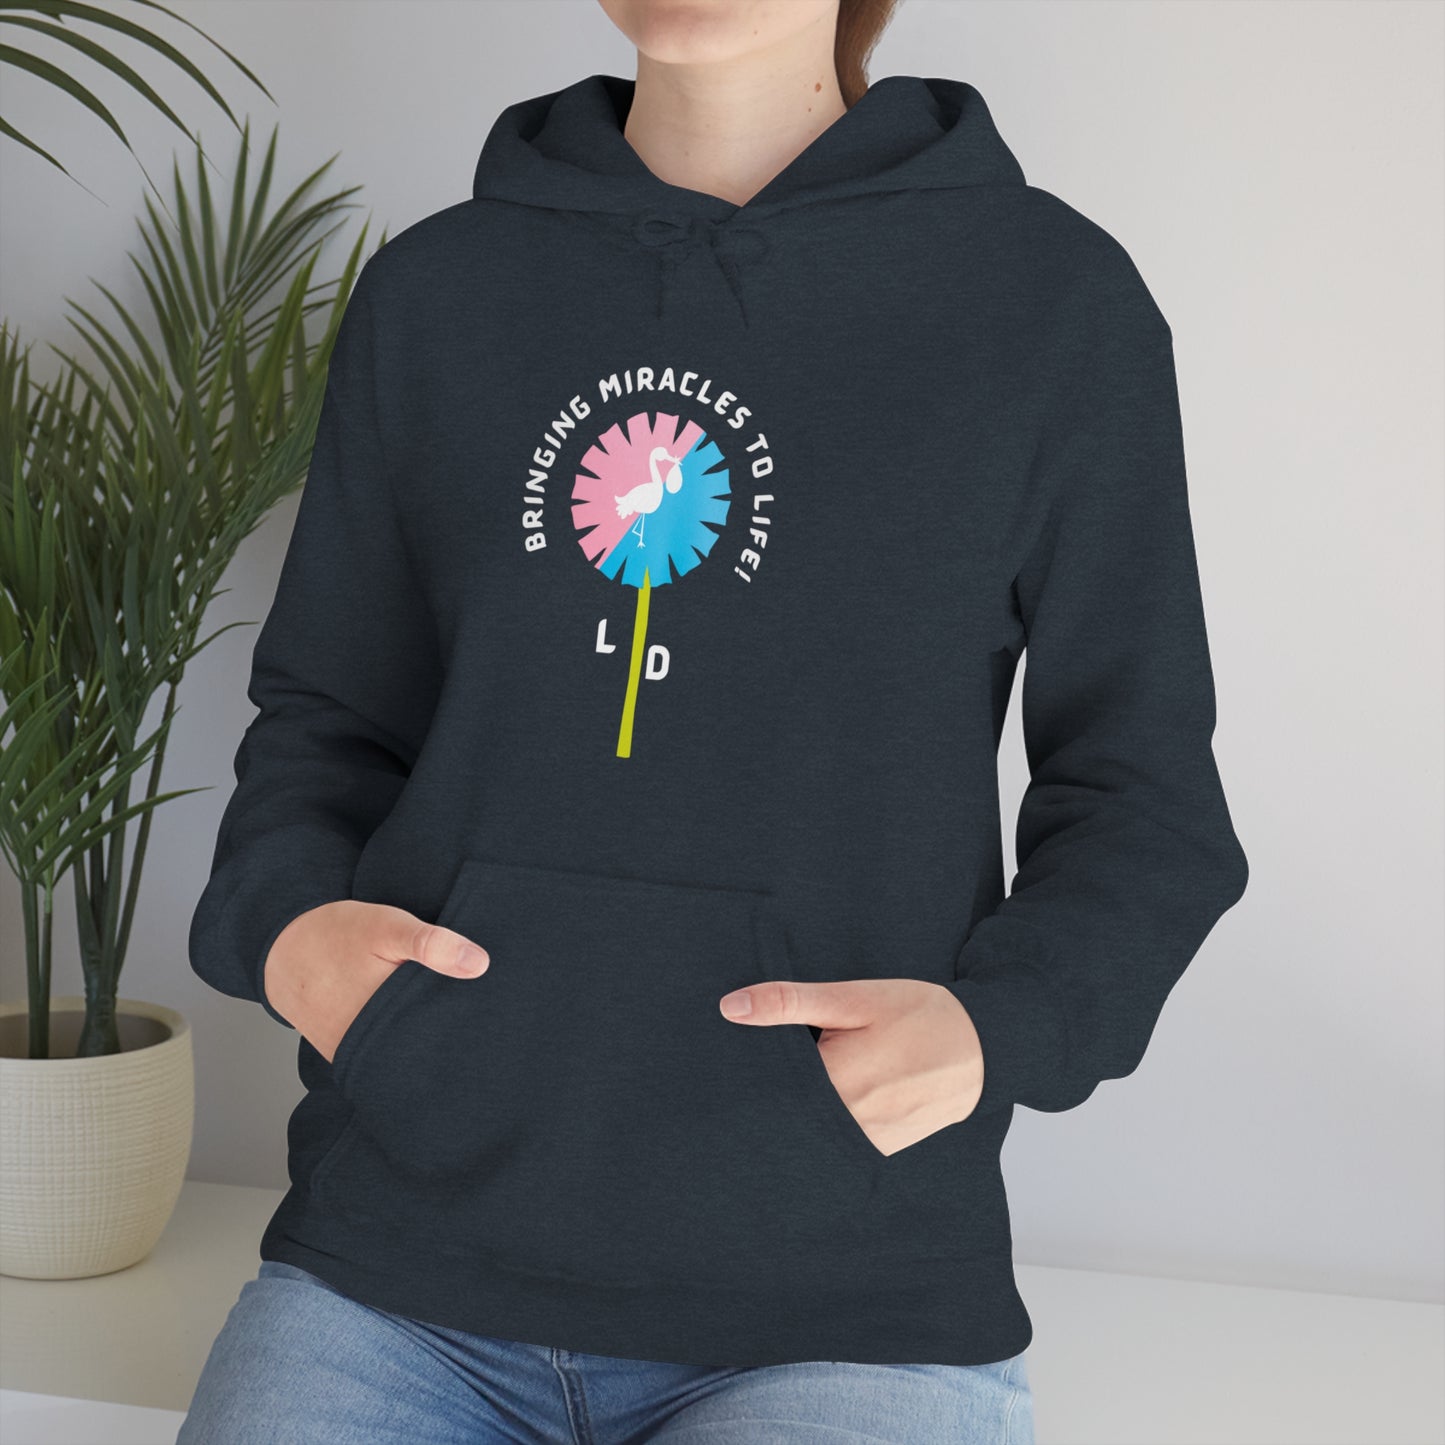 L AND D NURSE MIRACLES SWEATSHIRT GIFT FOR NURSES